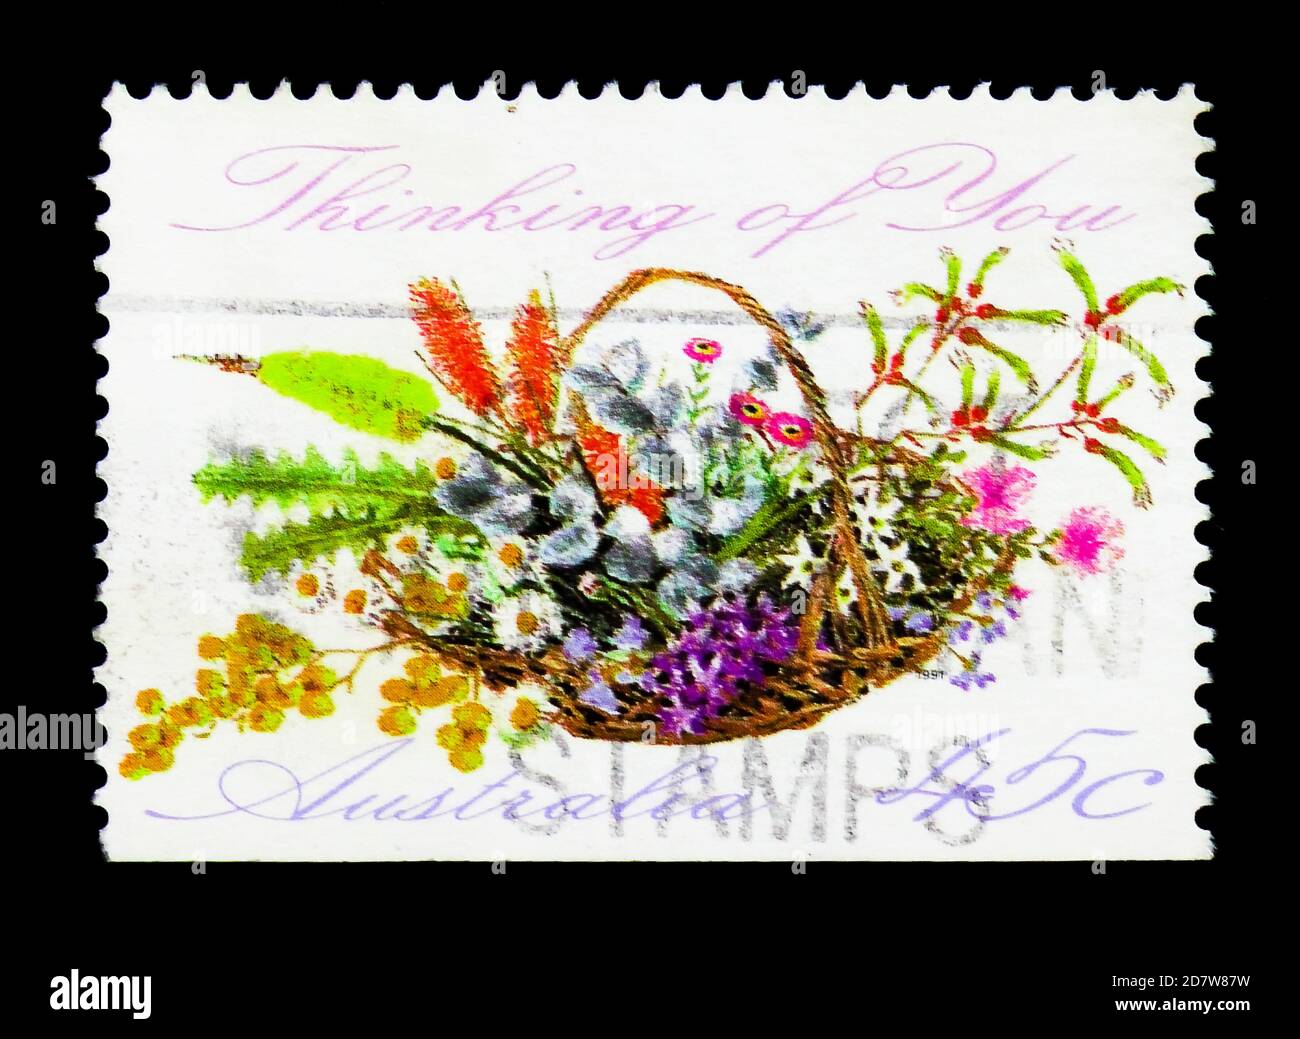 Thinking of You Stamps